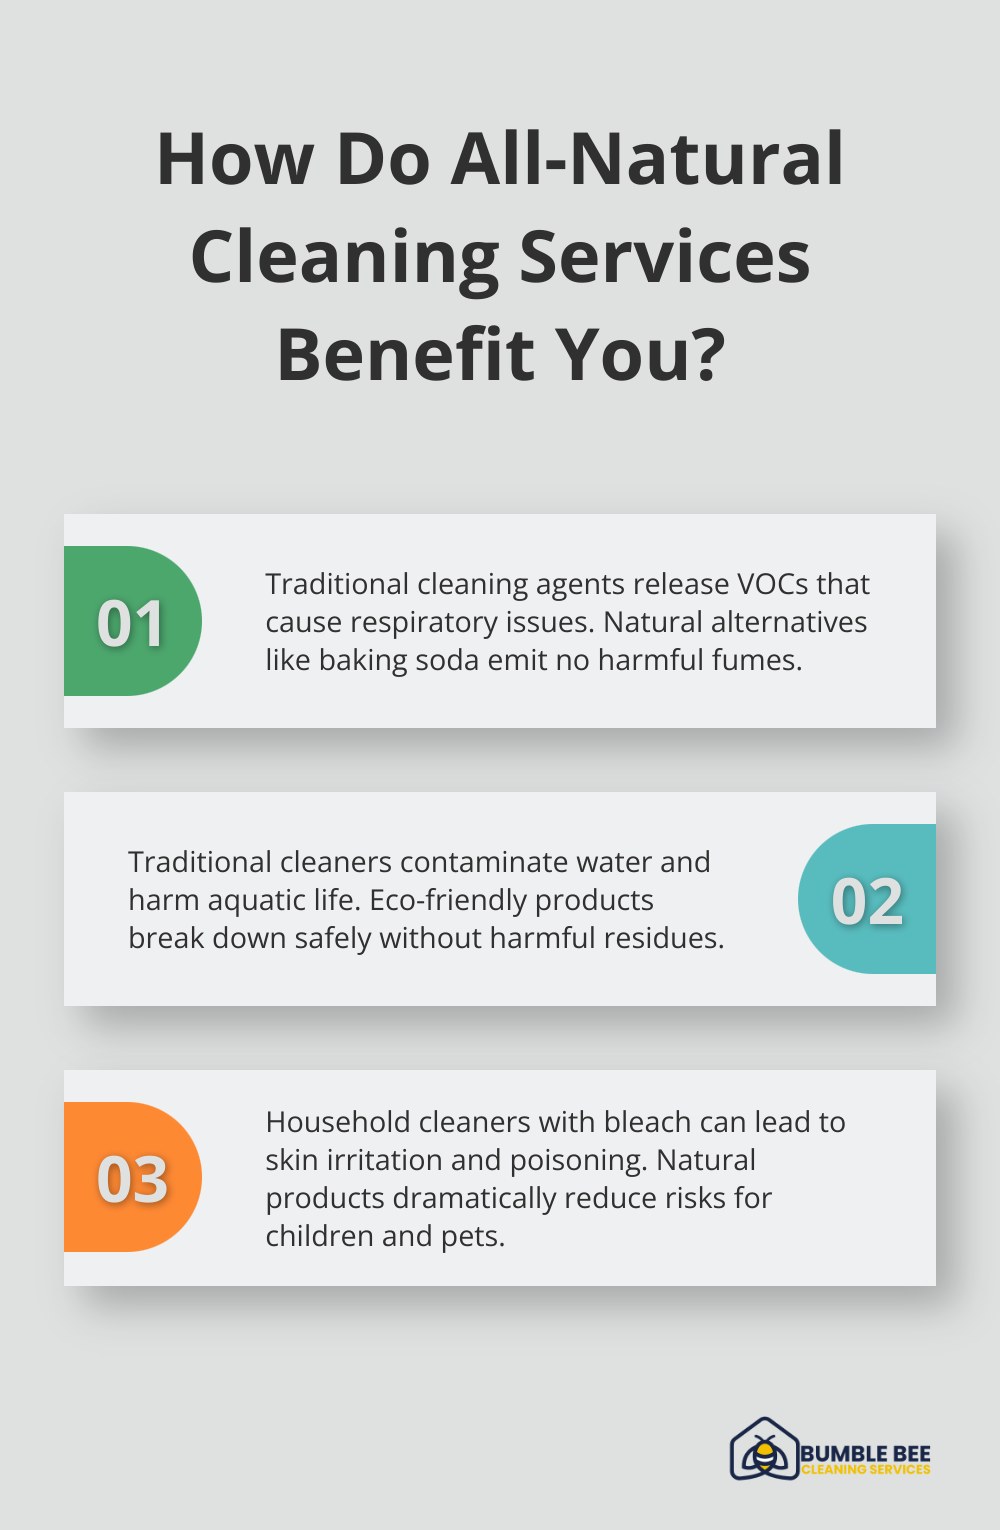 Fact - How Do All-Natural Cleaning Services Benefit You?